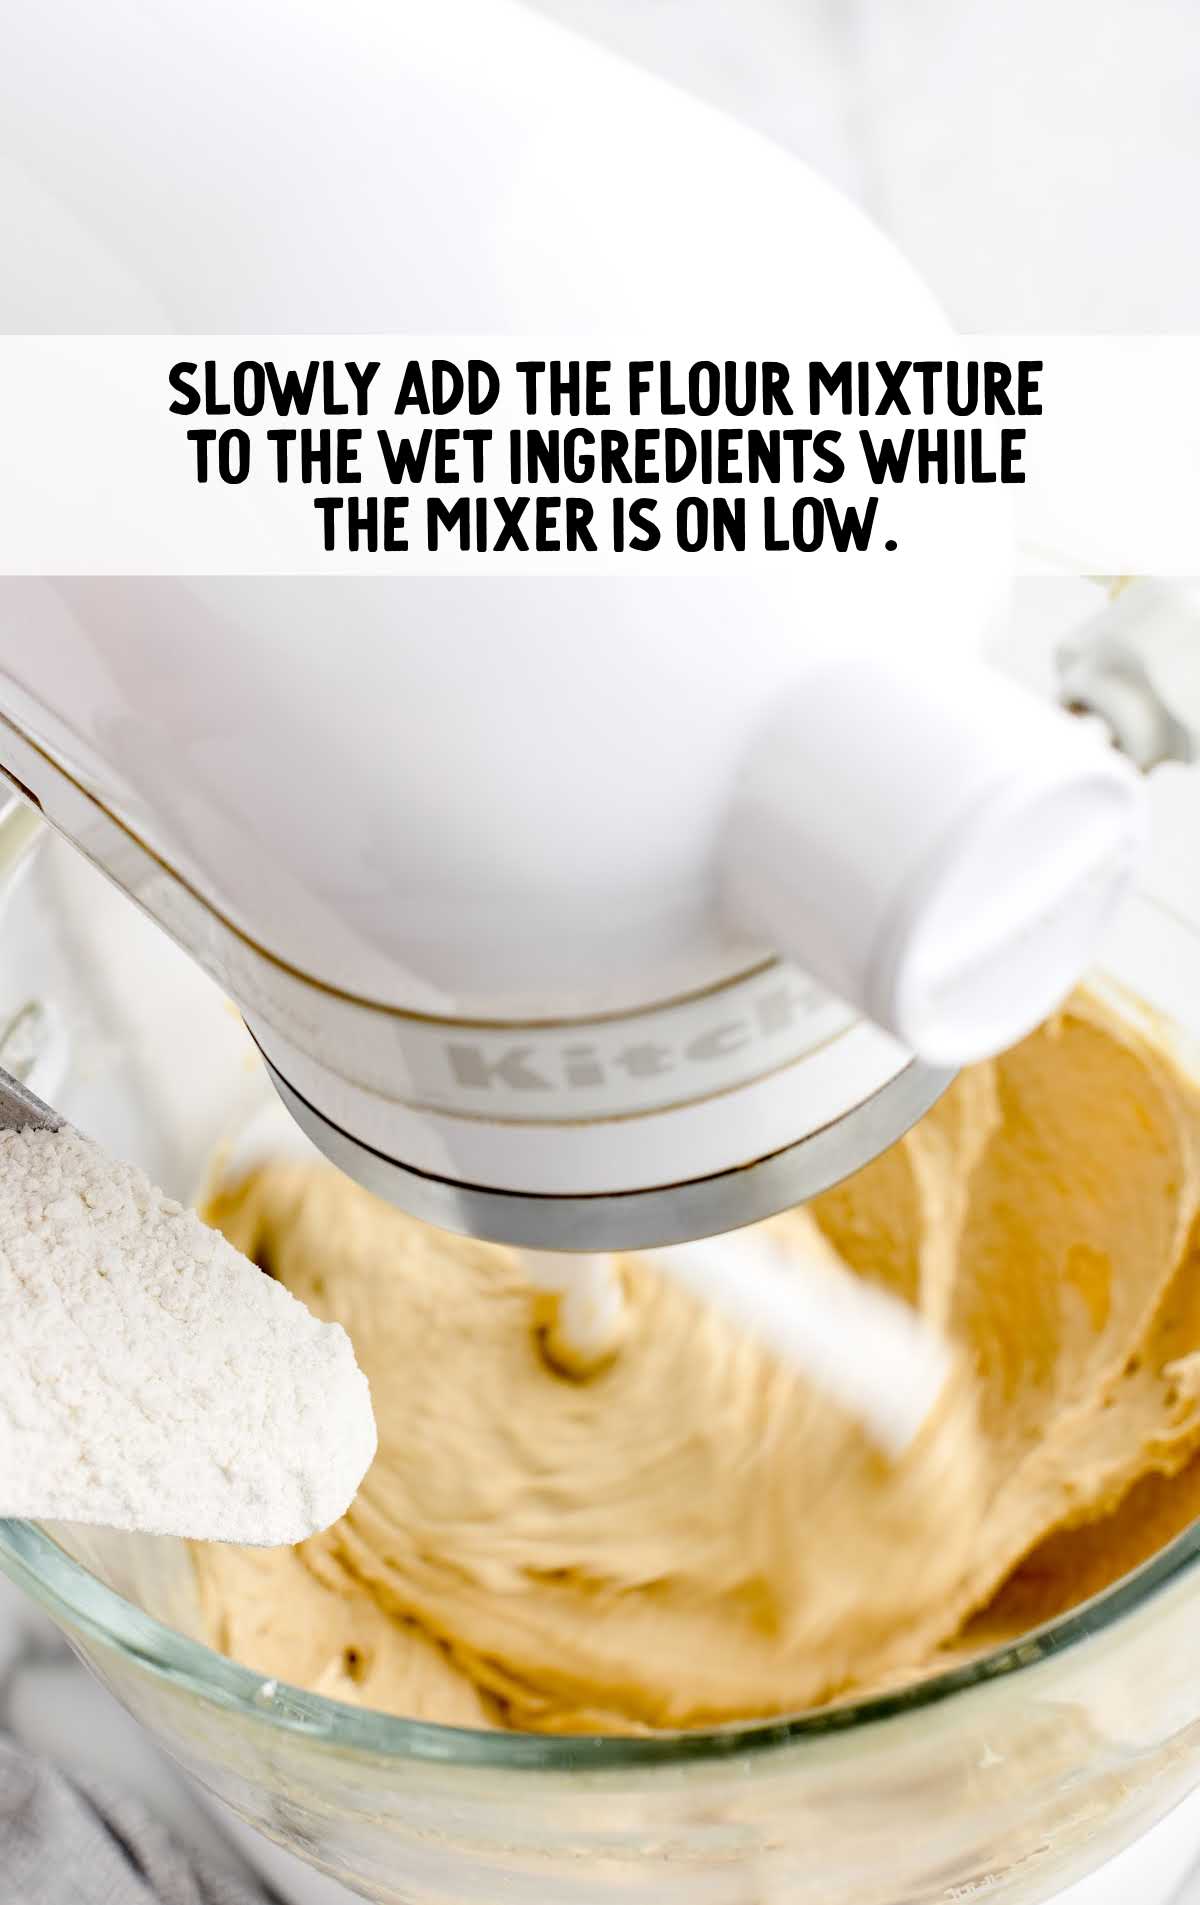 flour mixture added to the wet ingredients and blended together